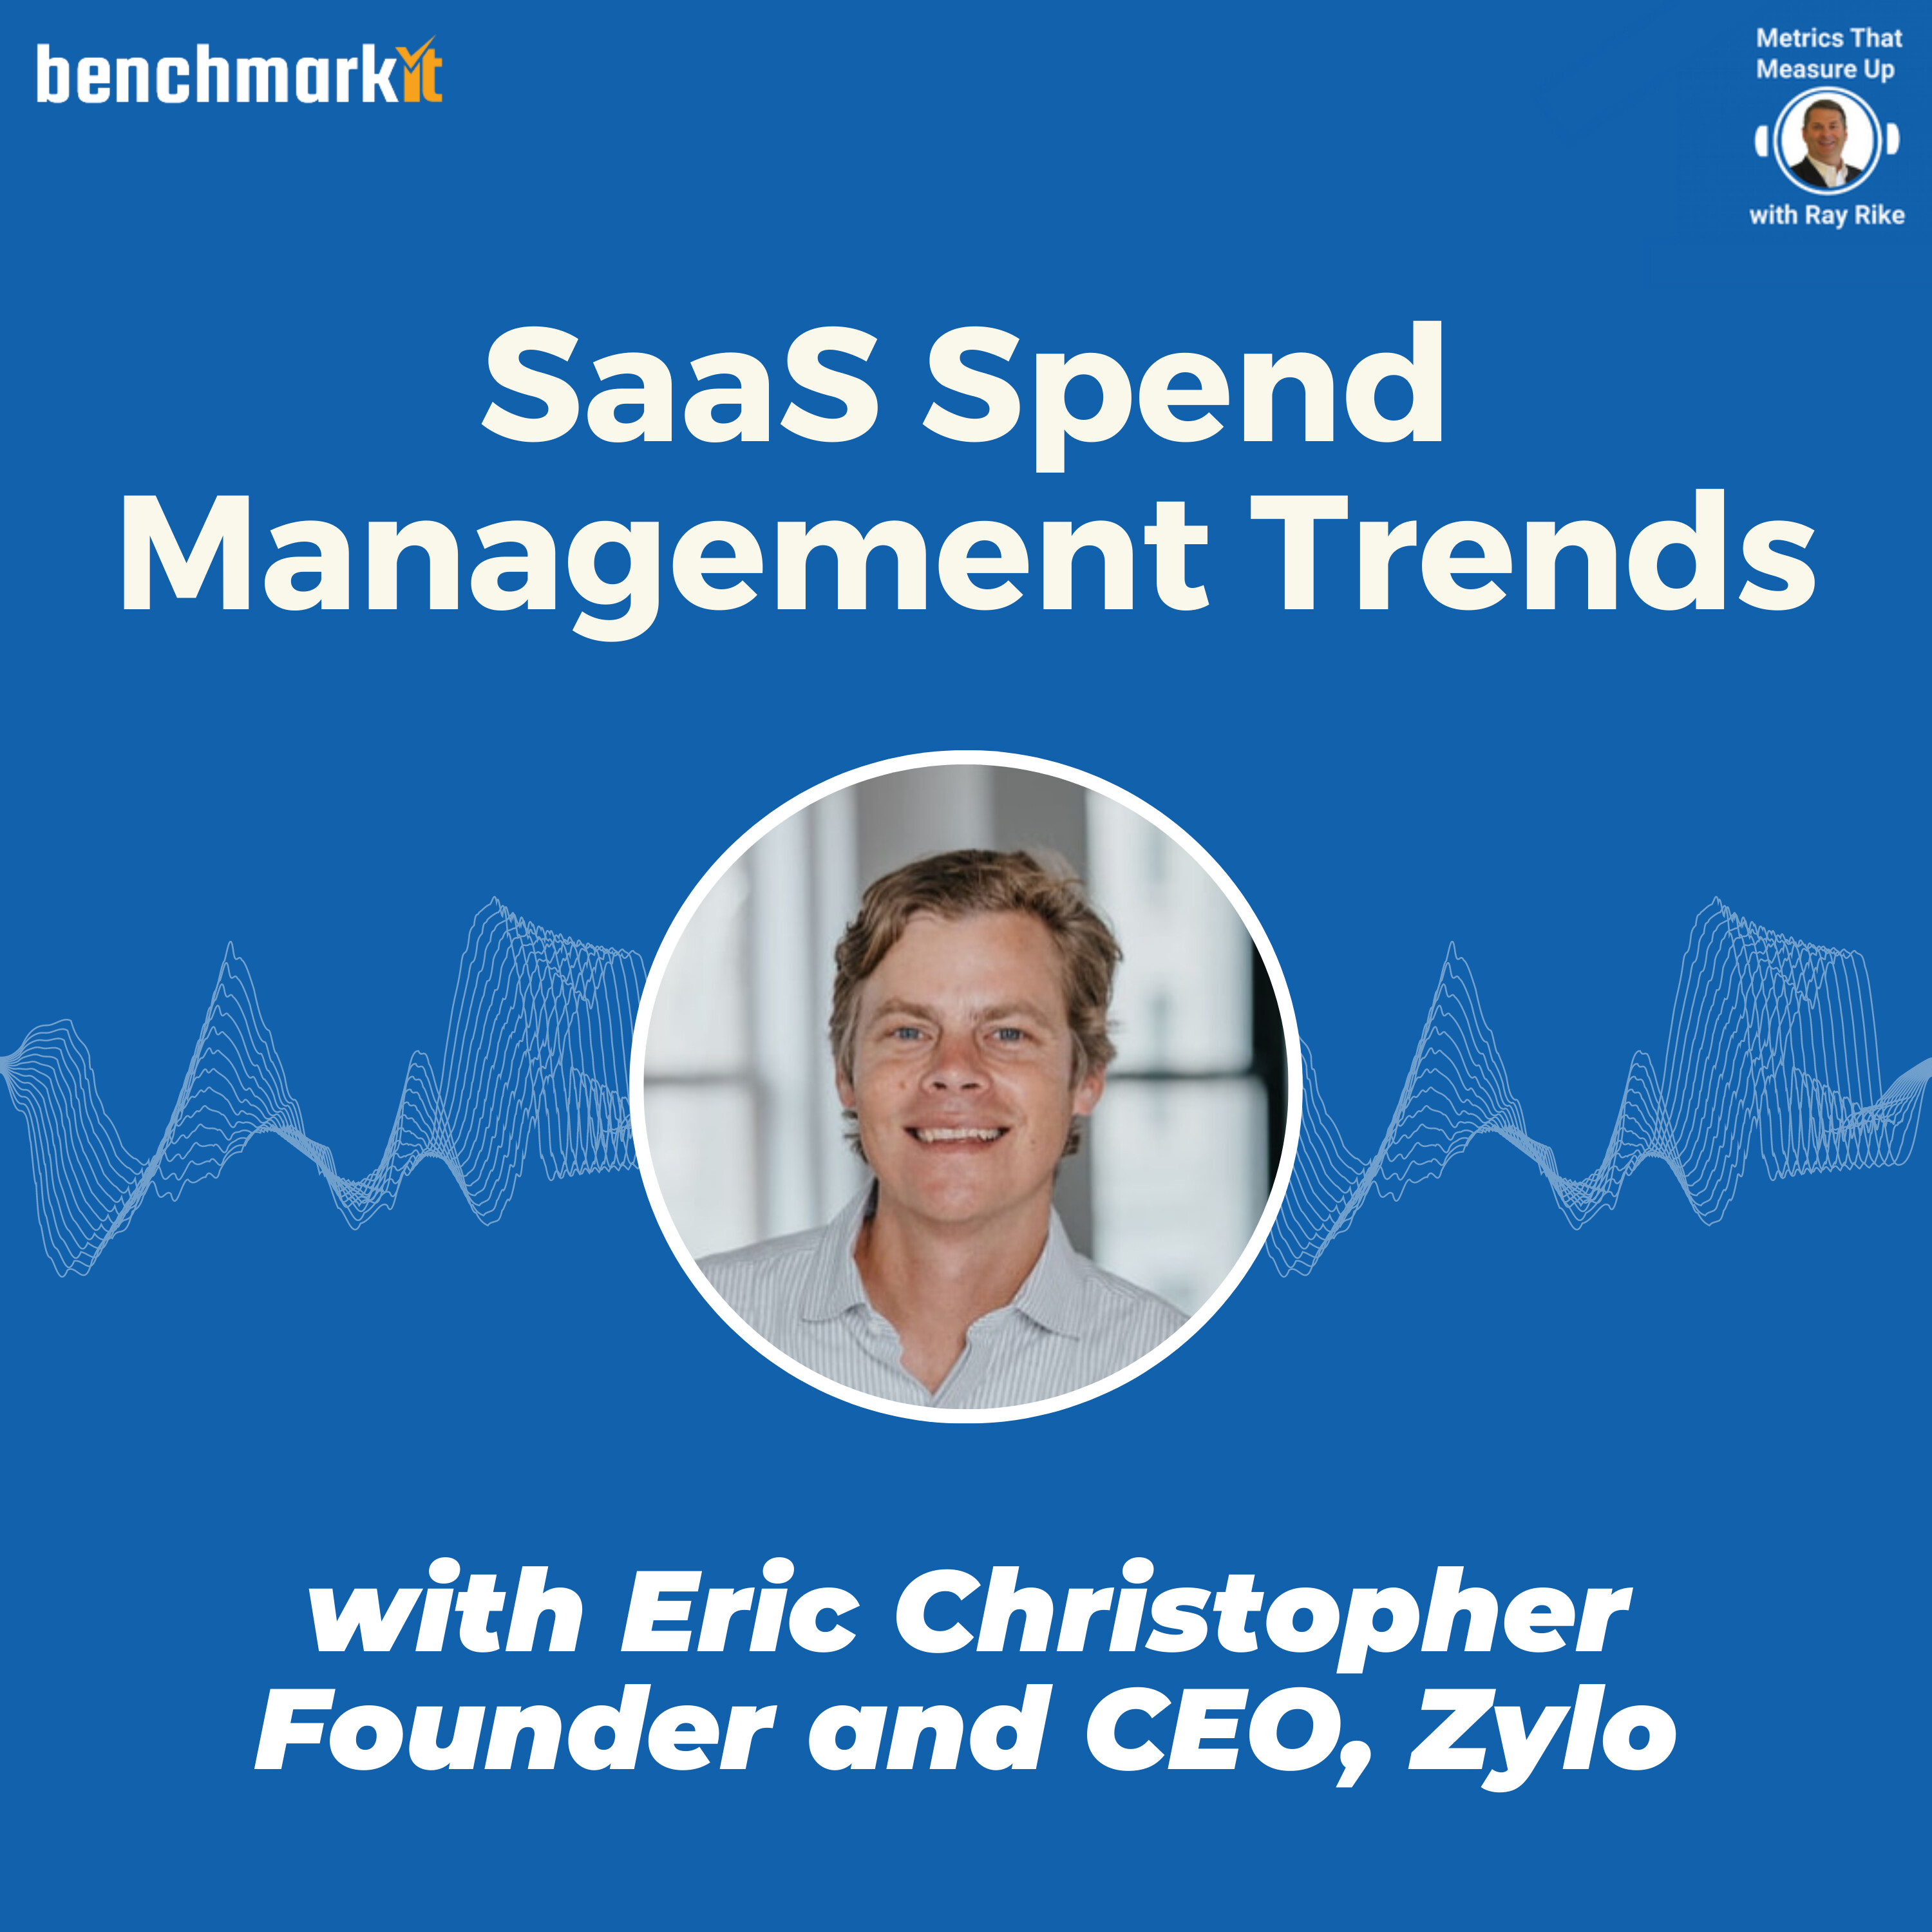 SaaS Spend Management Trends - with Eric Christopher, Founder and CEO Zylo